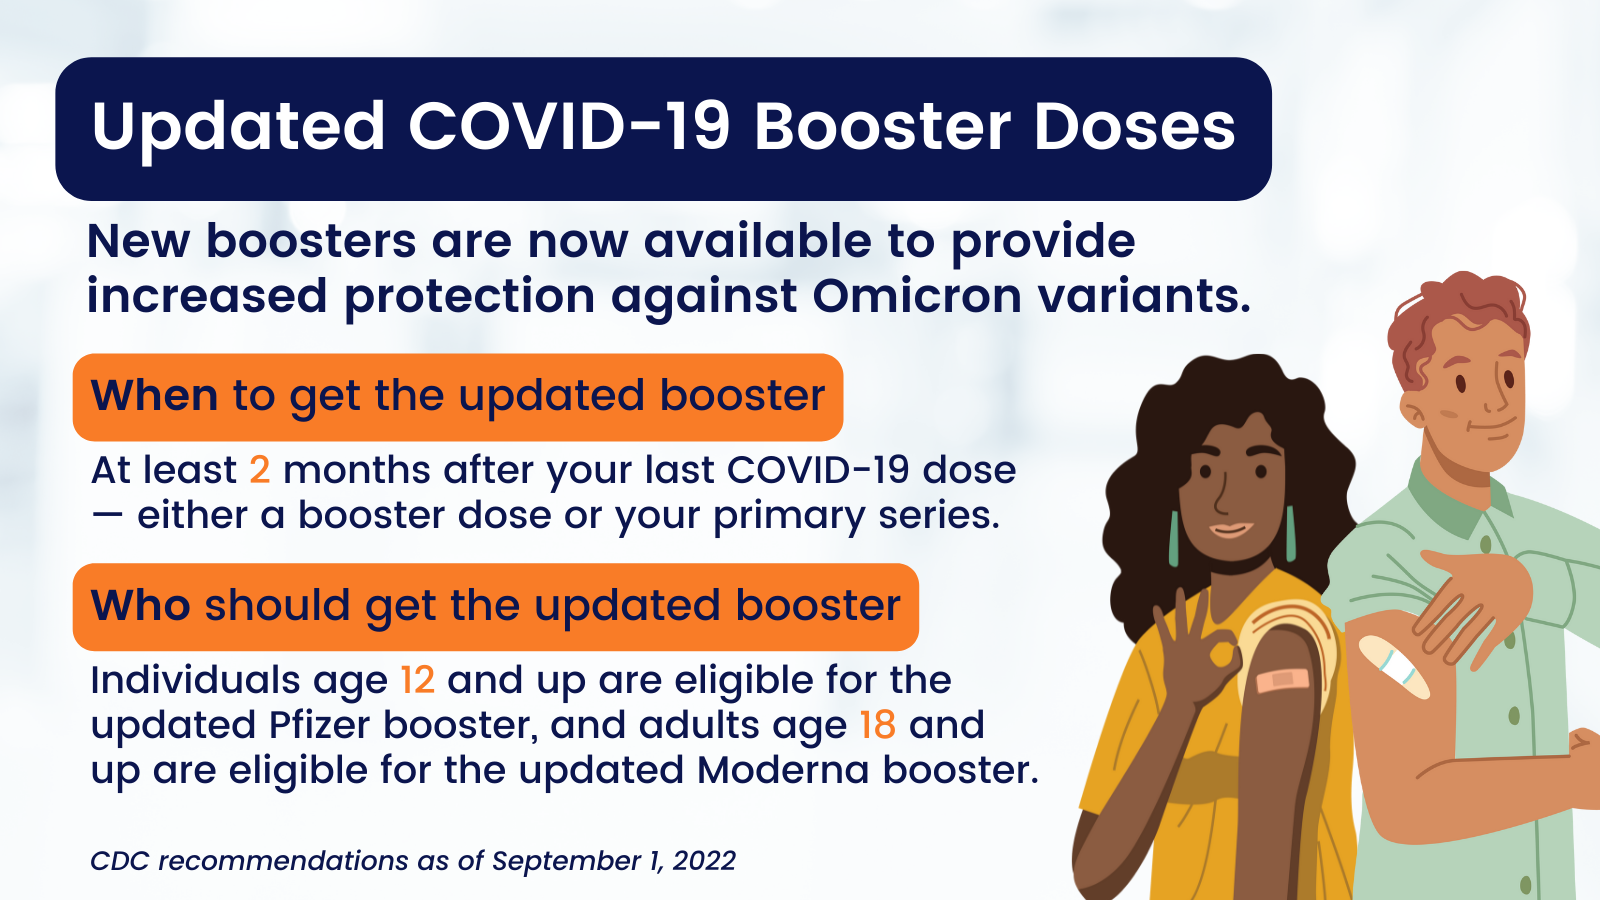 Twitter size image with white background and navy, orange and white text communicates information about updated COVID-19 booster doses. CDC recommendations as of 09/01/2022 is in the bottom left corner. Tan male and Black female are smiling and pointing to a band aid on on their upper arm where they received their booster.